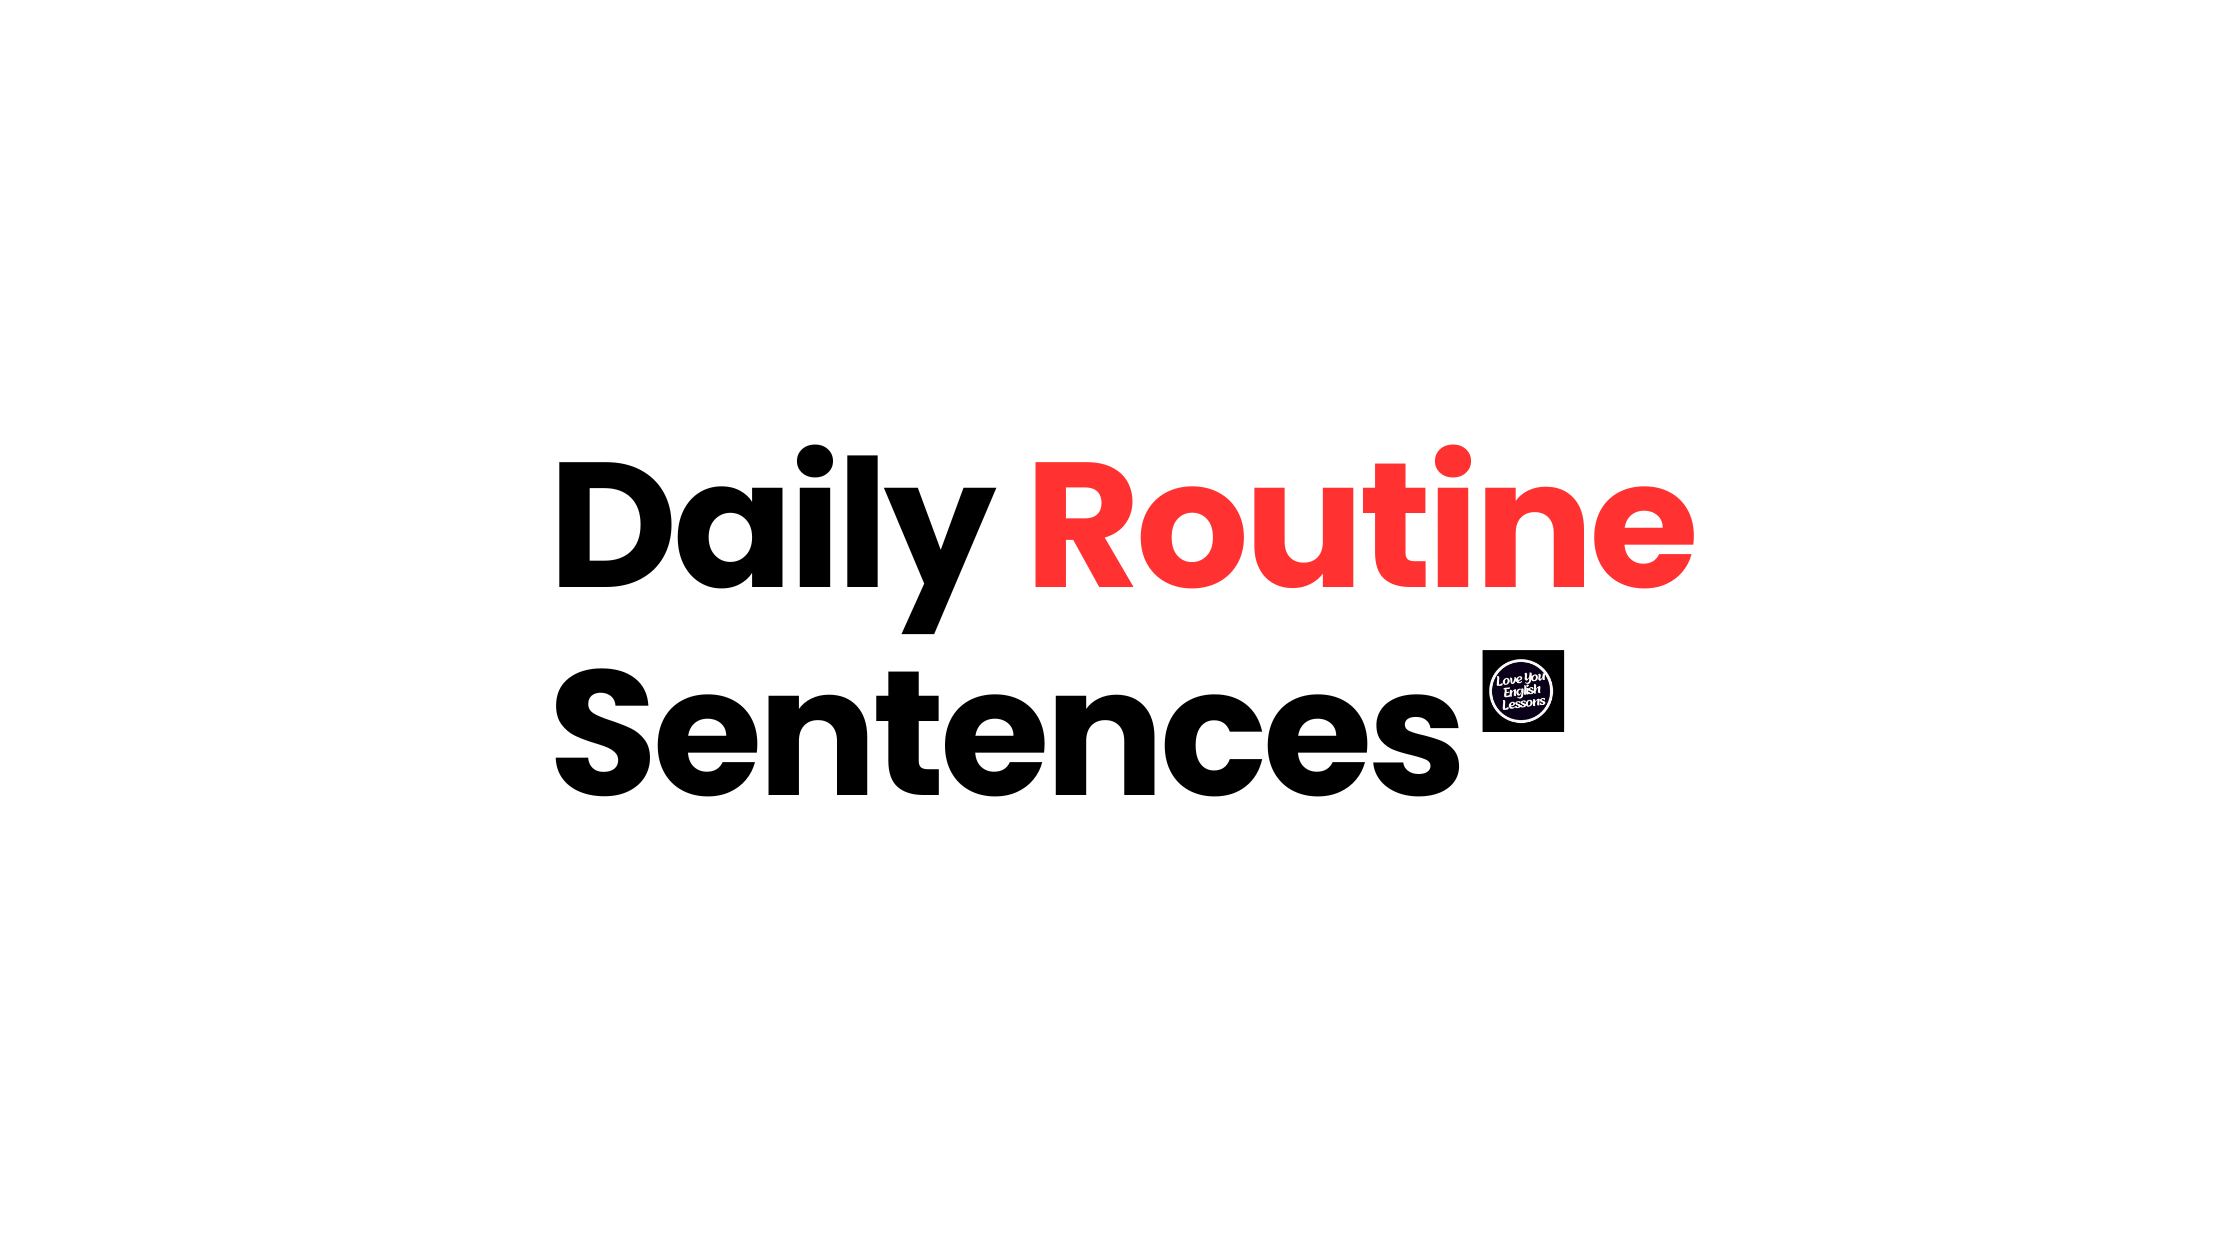 Daily routine sentences in English